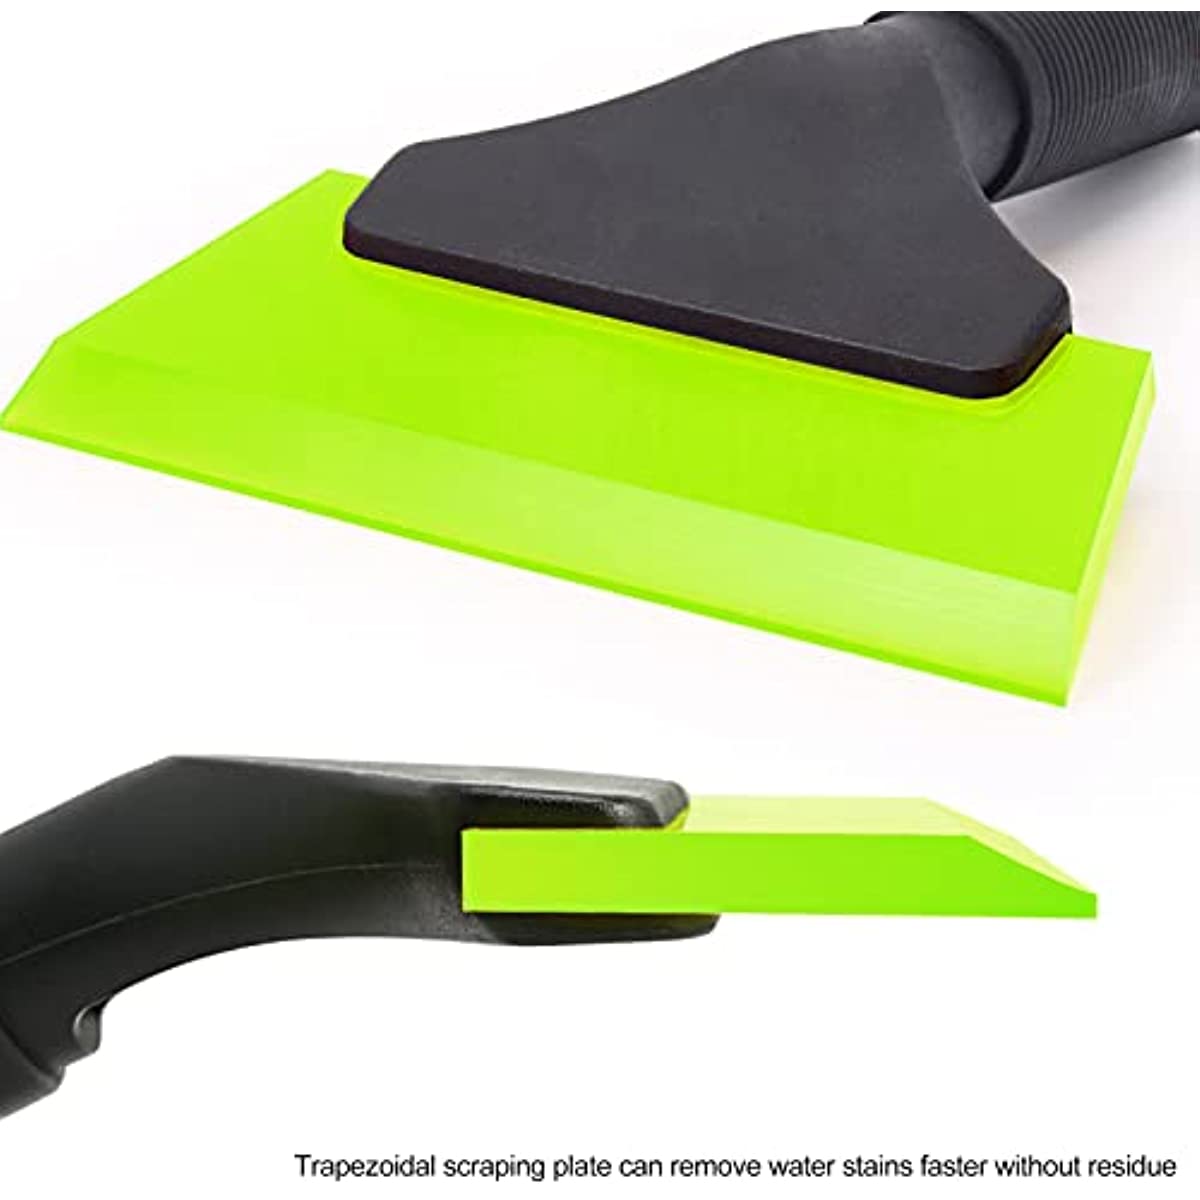 Car Window Tint Film Water Wiper Flat Rubber Blade Hand Squeegee Multi  Clean Too